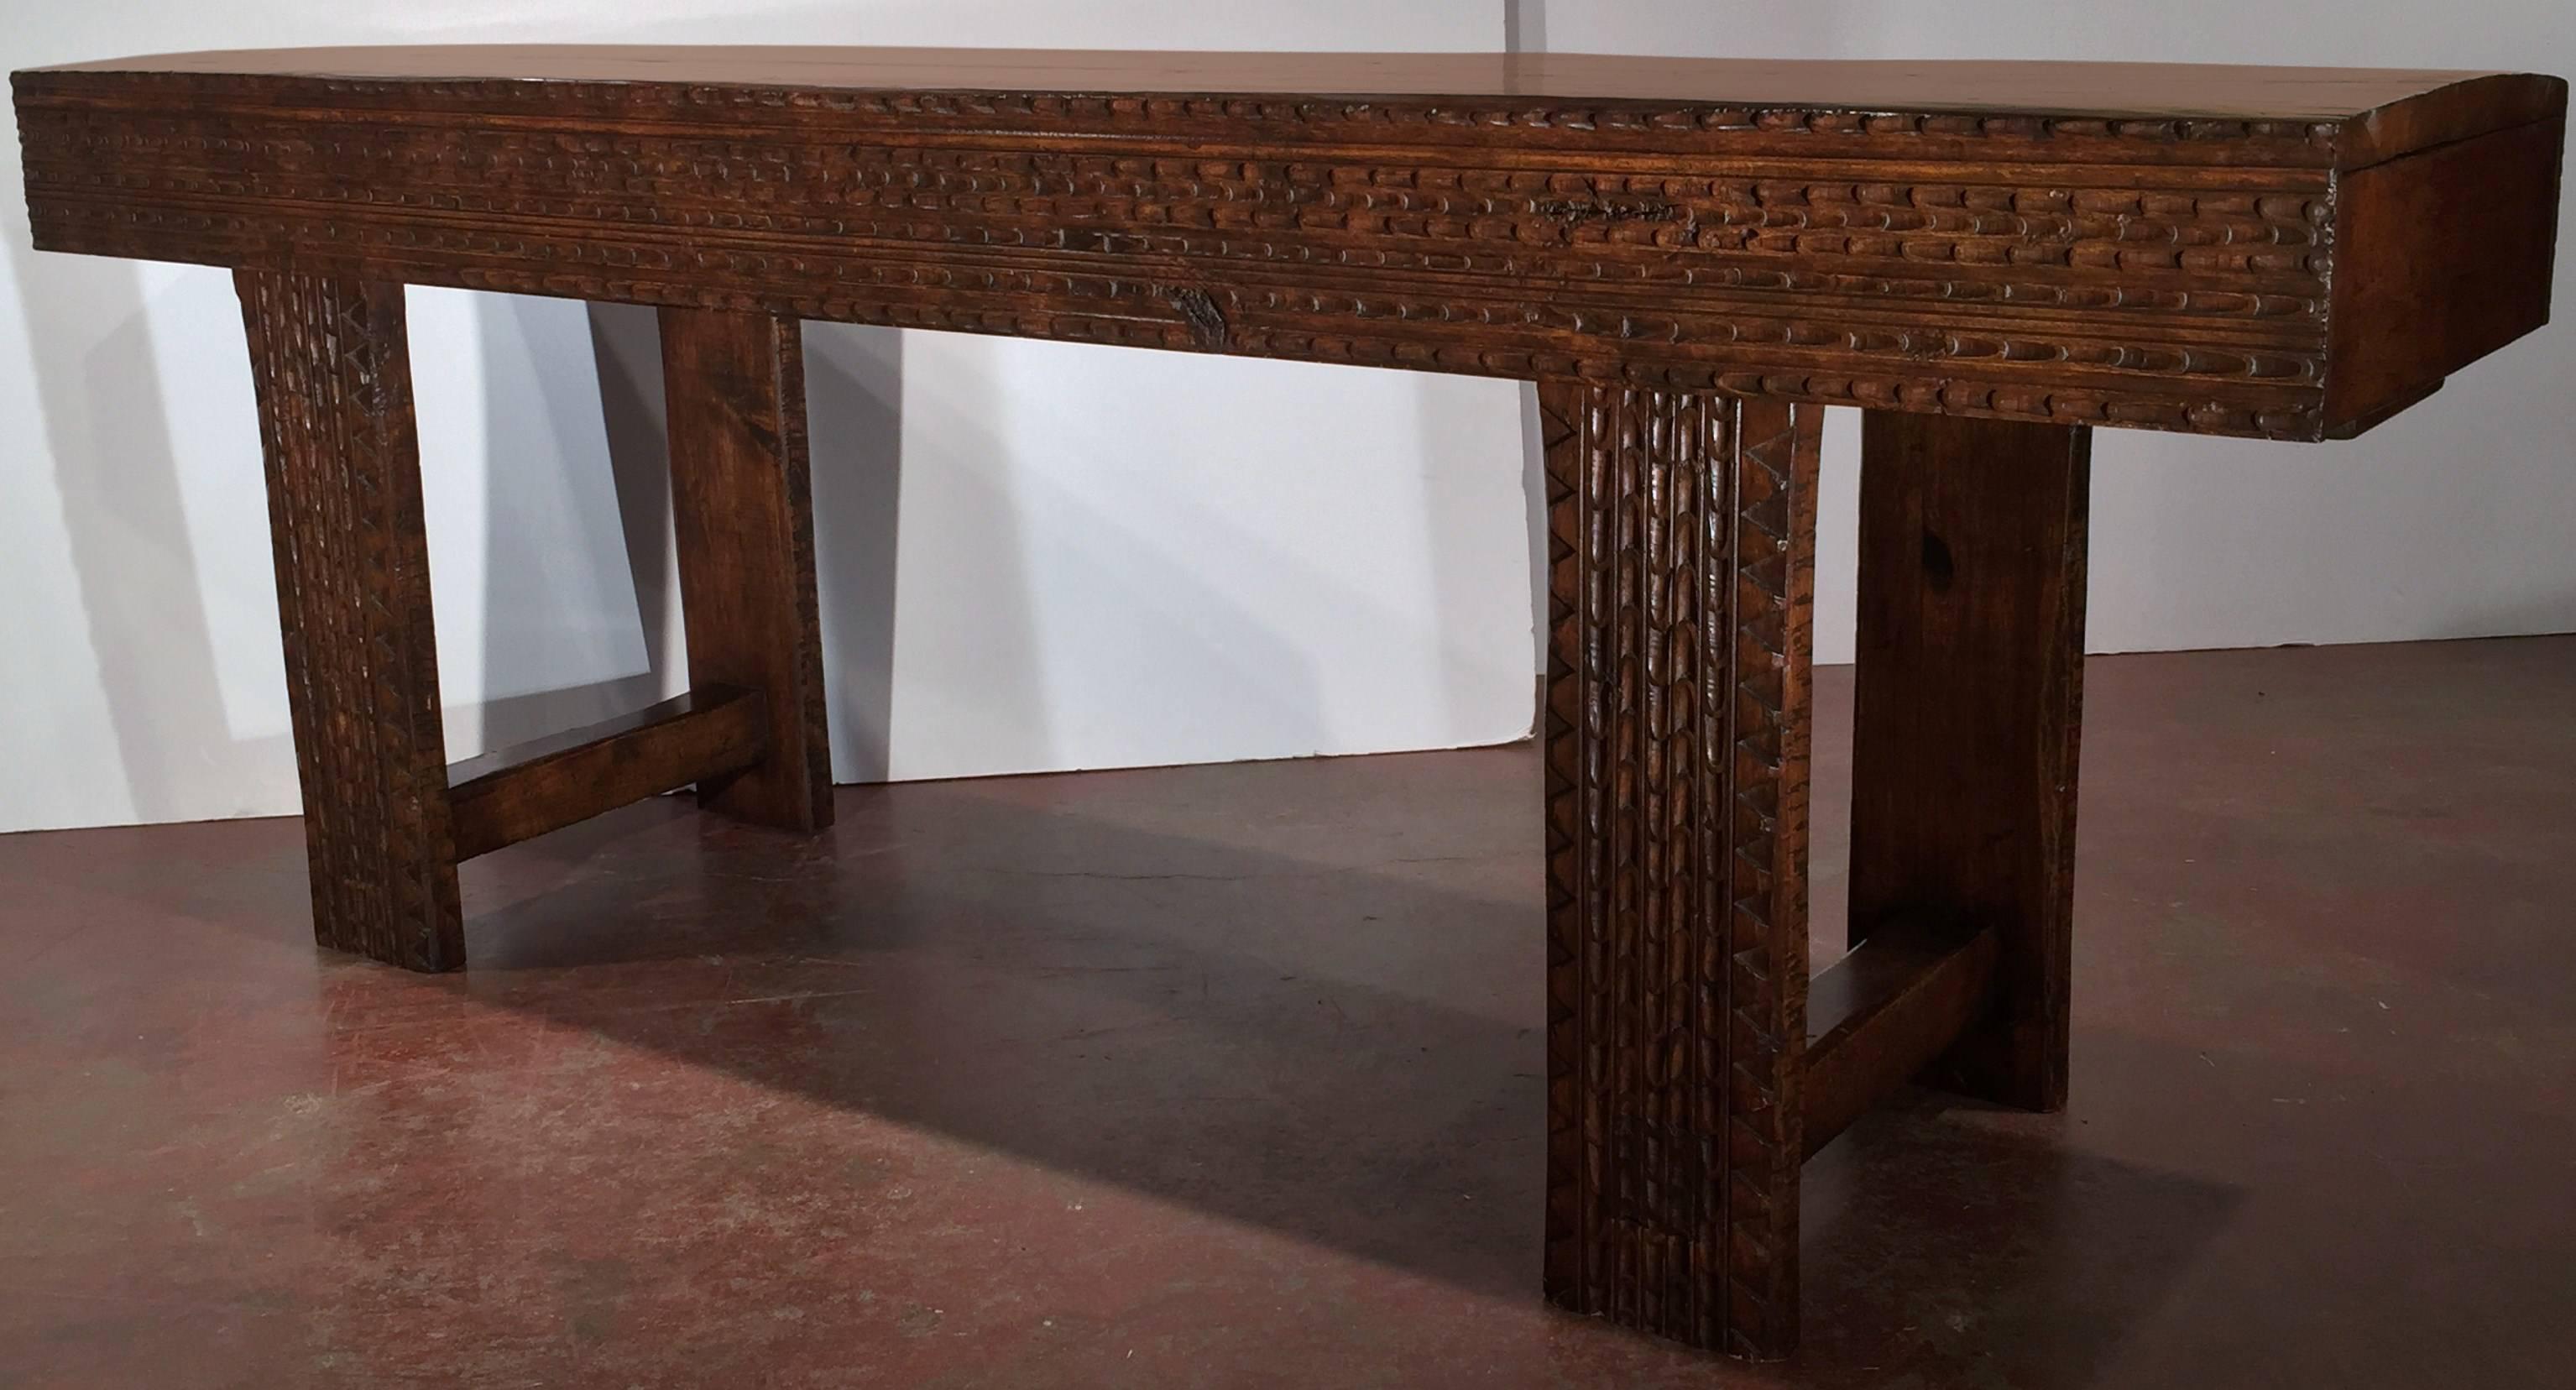 Rustic carved walnut sofa table from the French Pyrenees. This piece, carved on both sides with a drawer at each end, has great patina and character. A great addition for a contemporary home or a very traditional ranch!